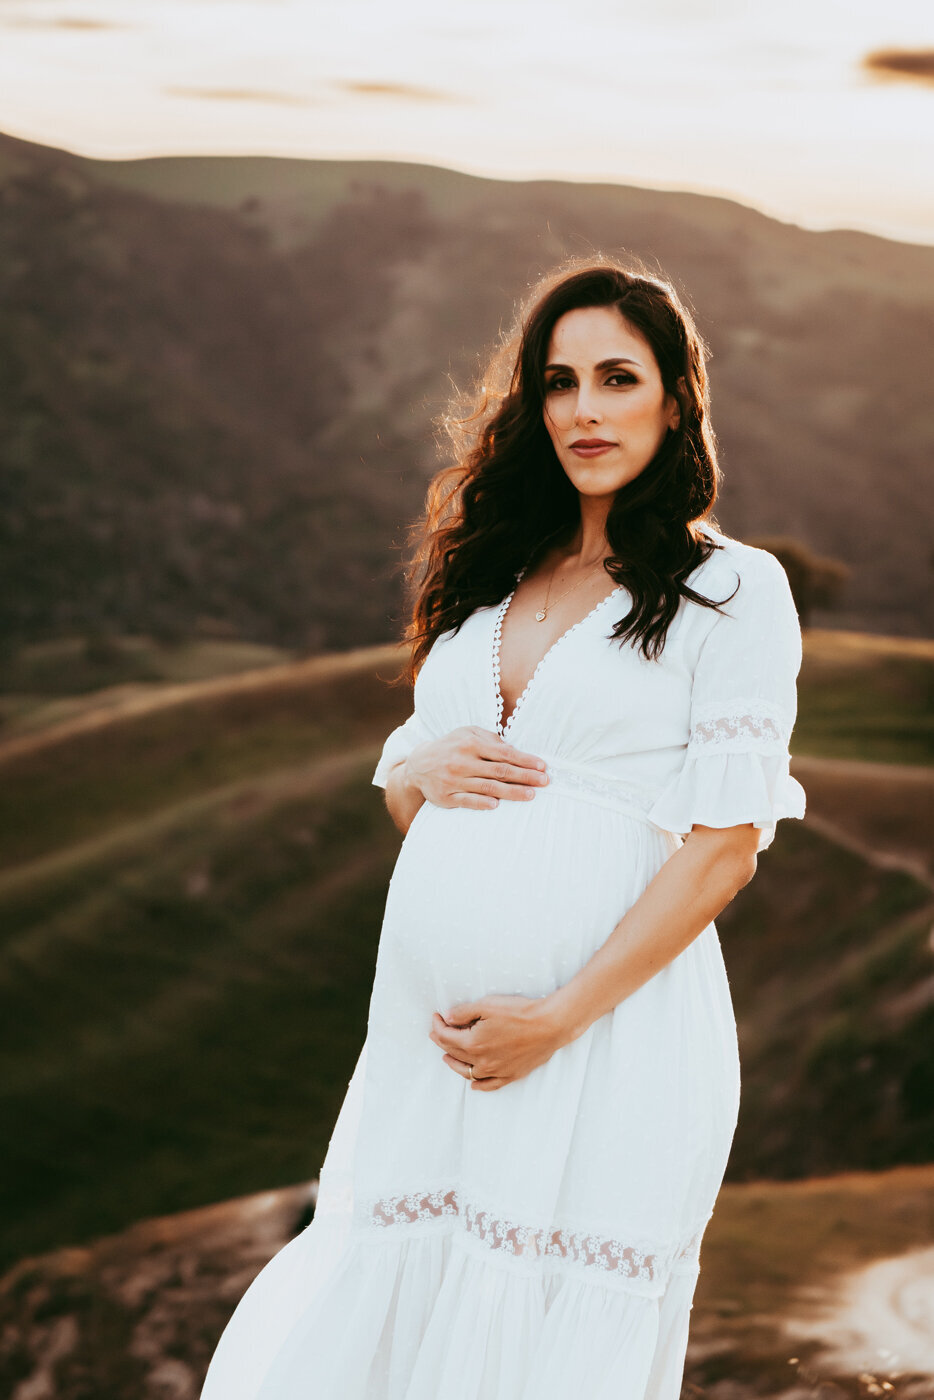 Stunning pregnant mama looking at the camera wearing a white dress